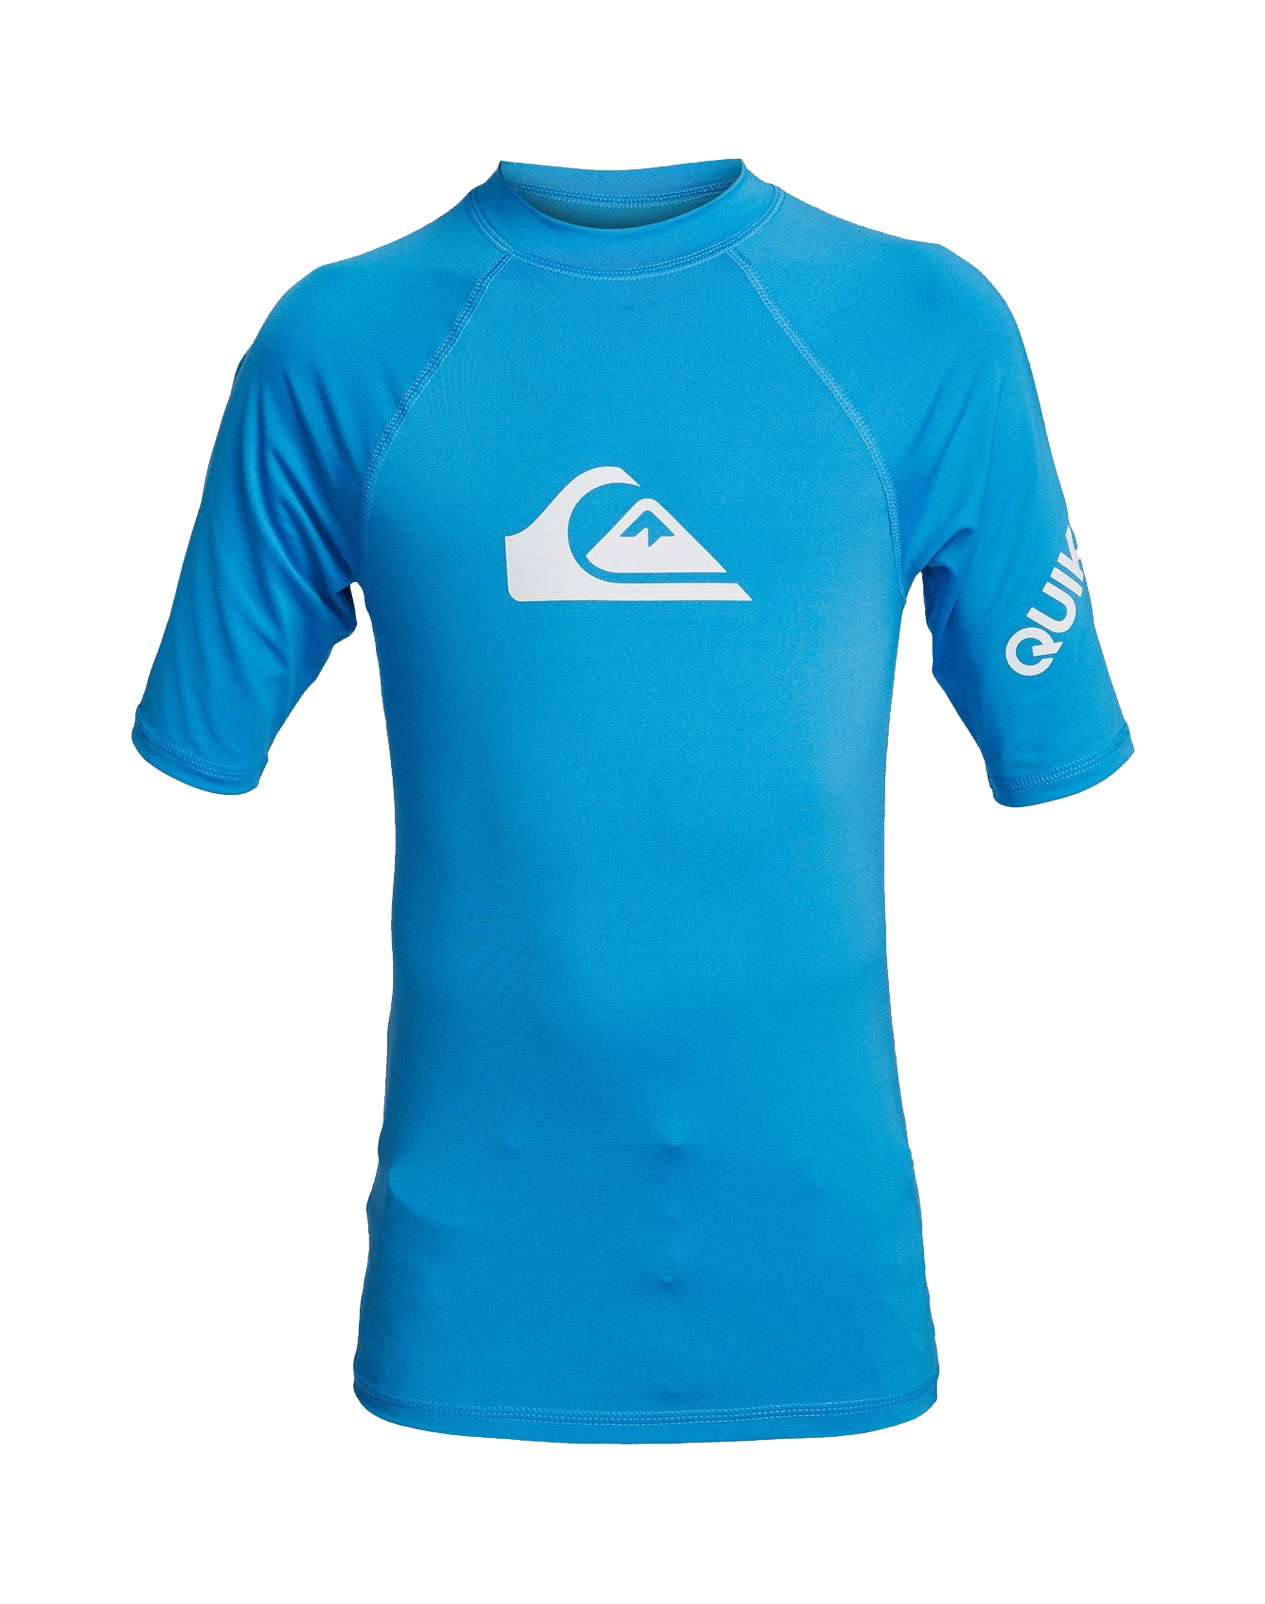 QUIKSILVER ALL TIME SS YOUTH EQBWR03121-BMM0 Μπλε